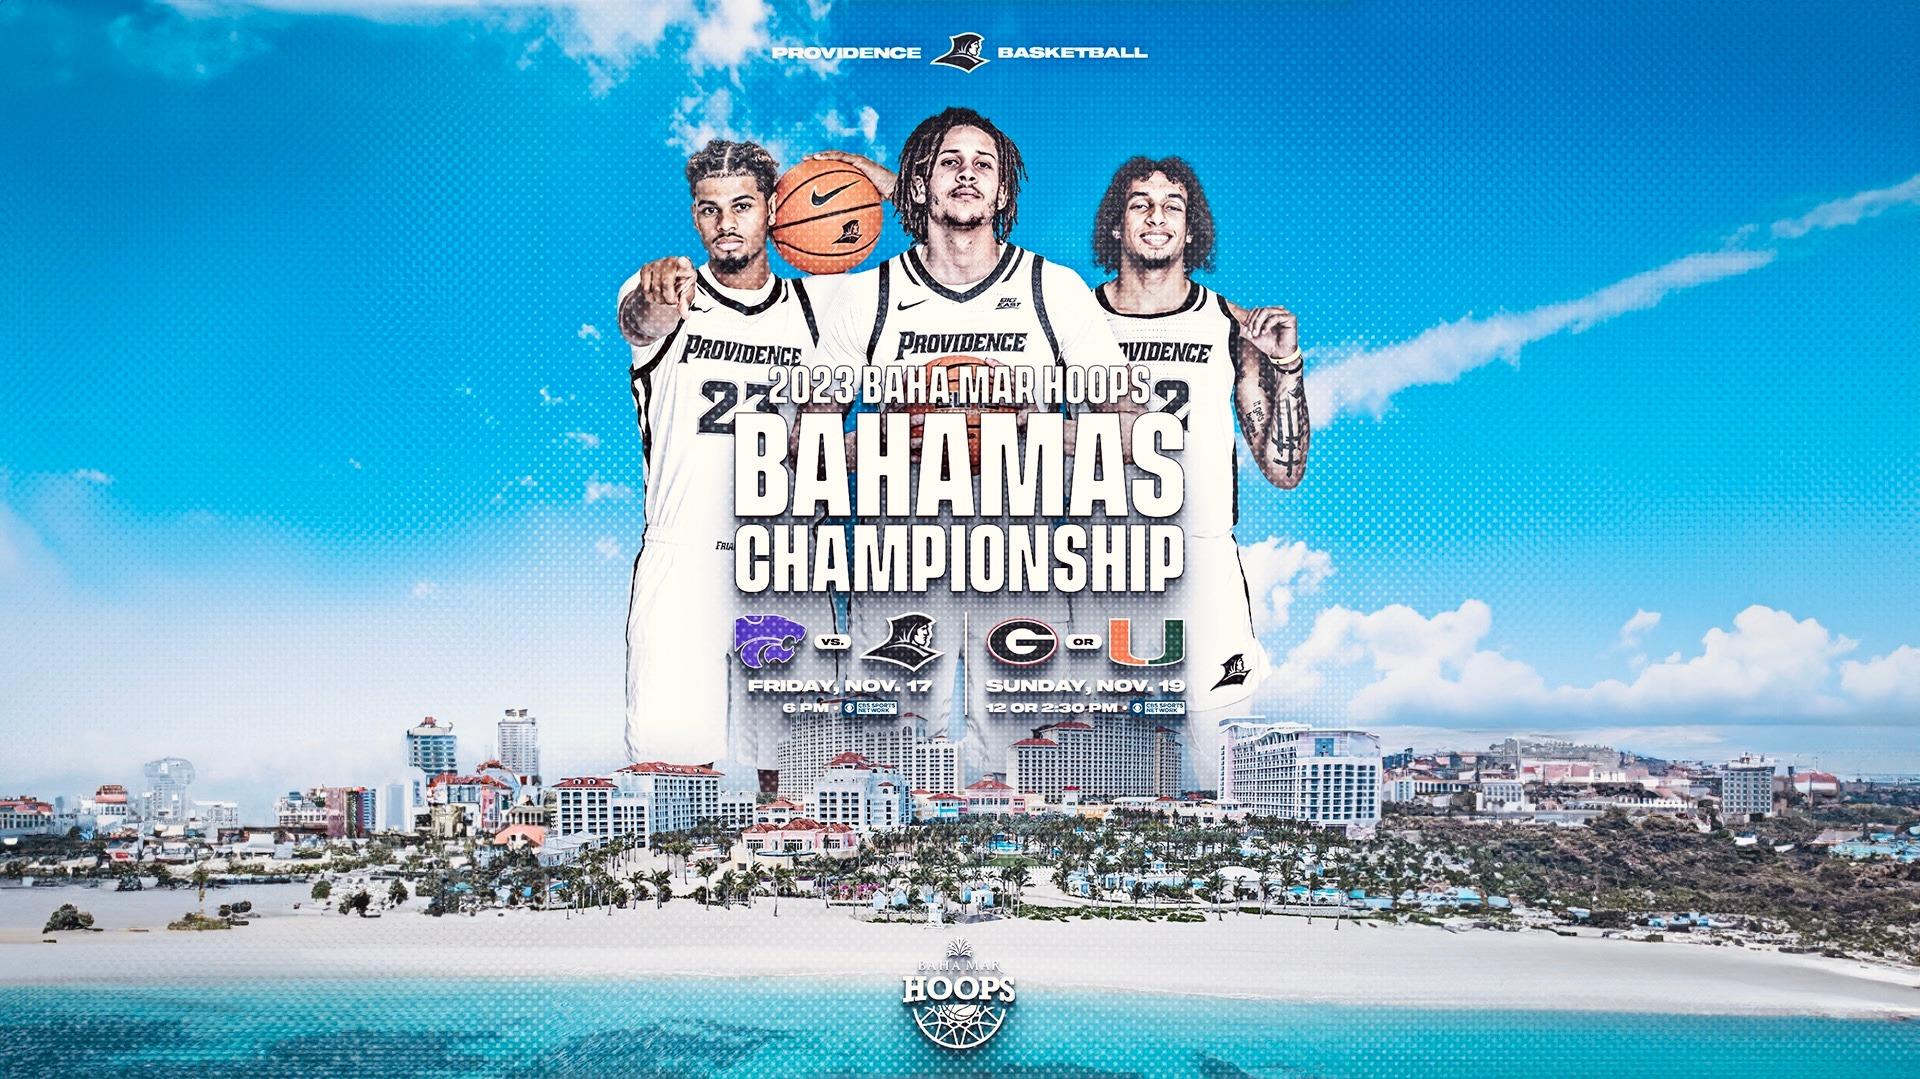 Free download Mens Basketball To Play Kansas State In Baha Mar Hoops